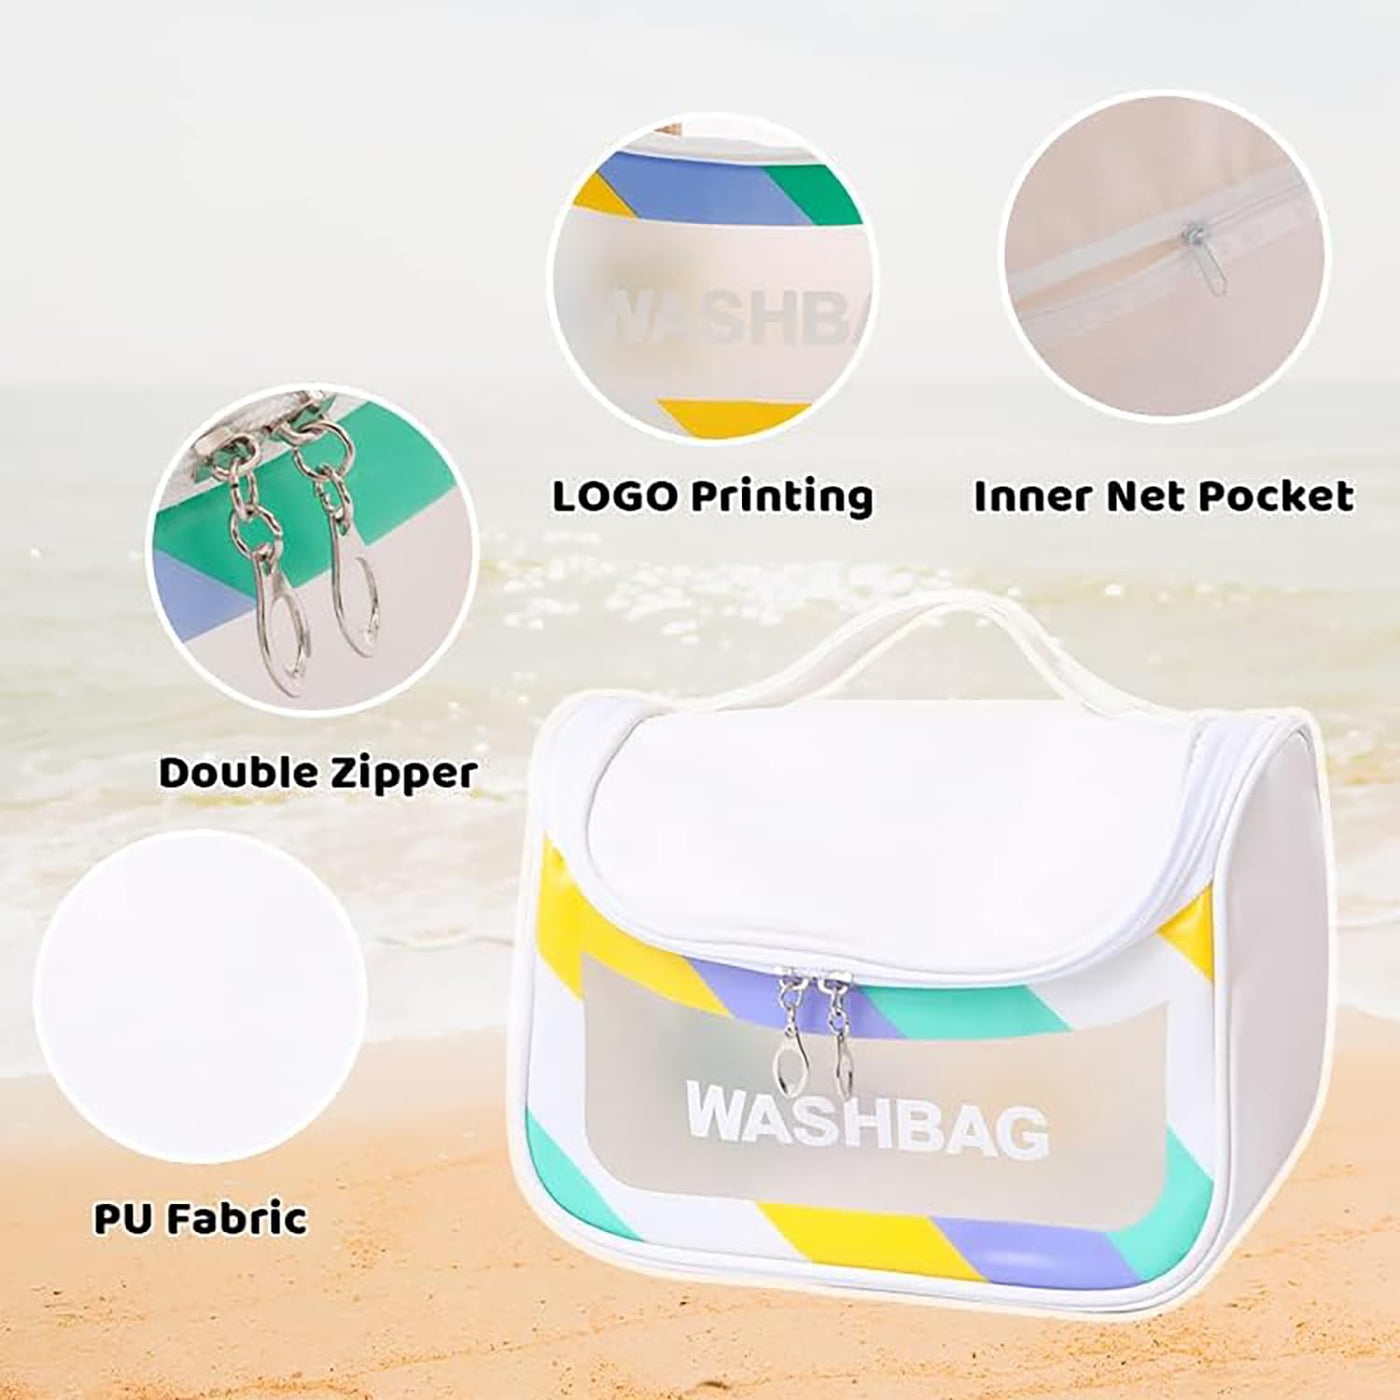 Travel Toiletry Bag for Women, Waterproof Cosmetic Wash Bag with Handy Handle - White